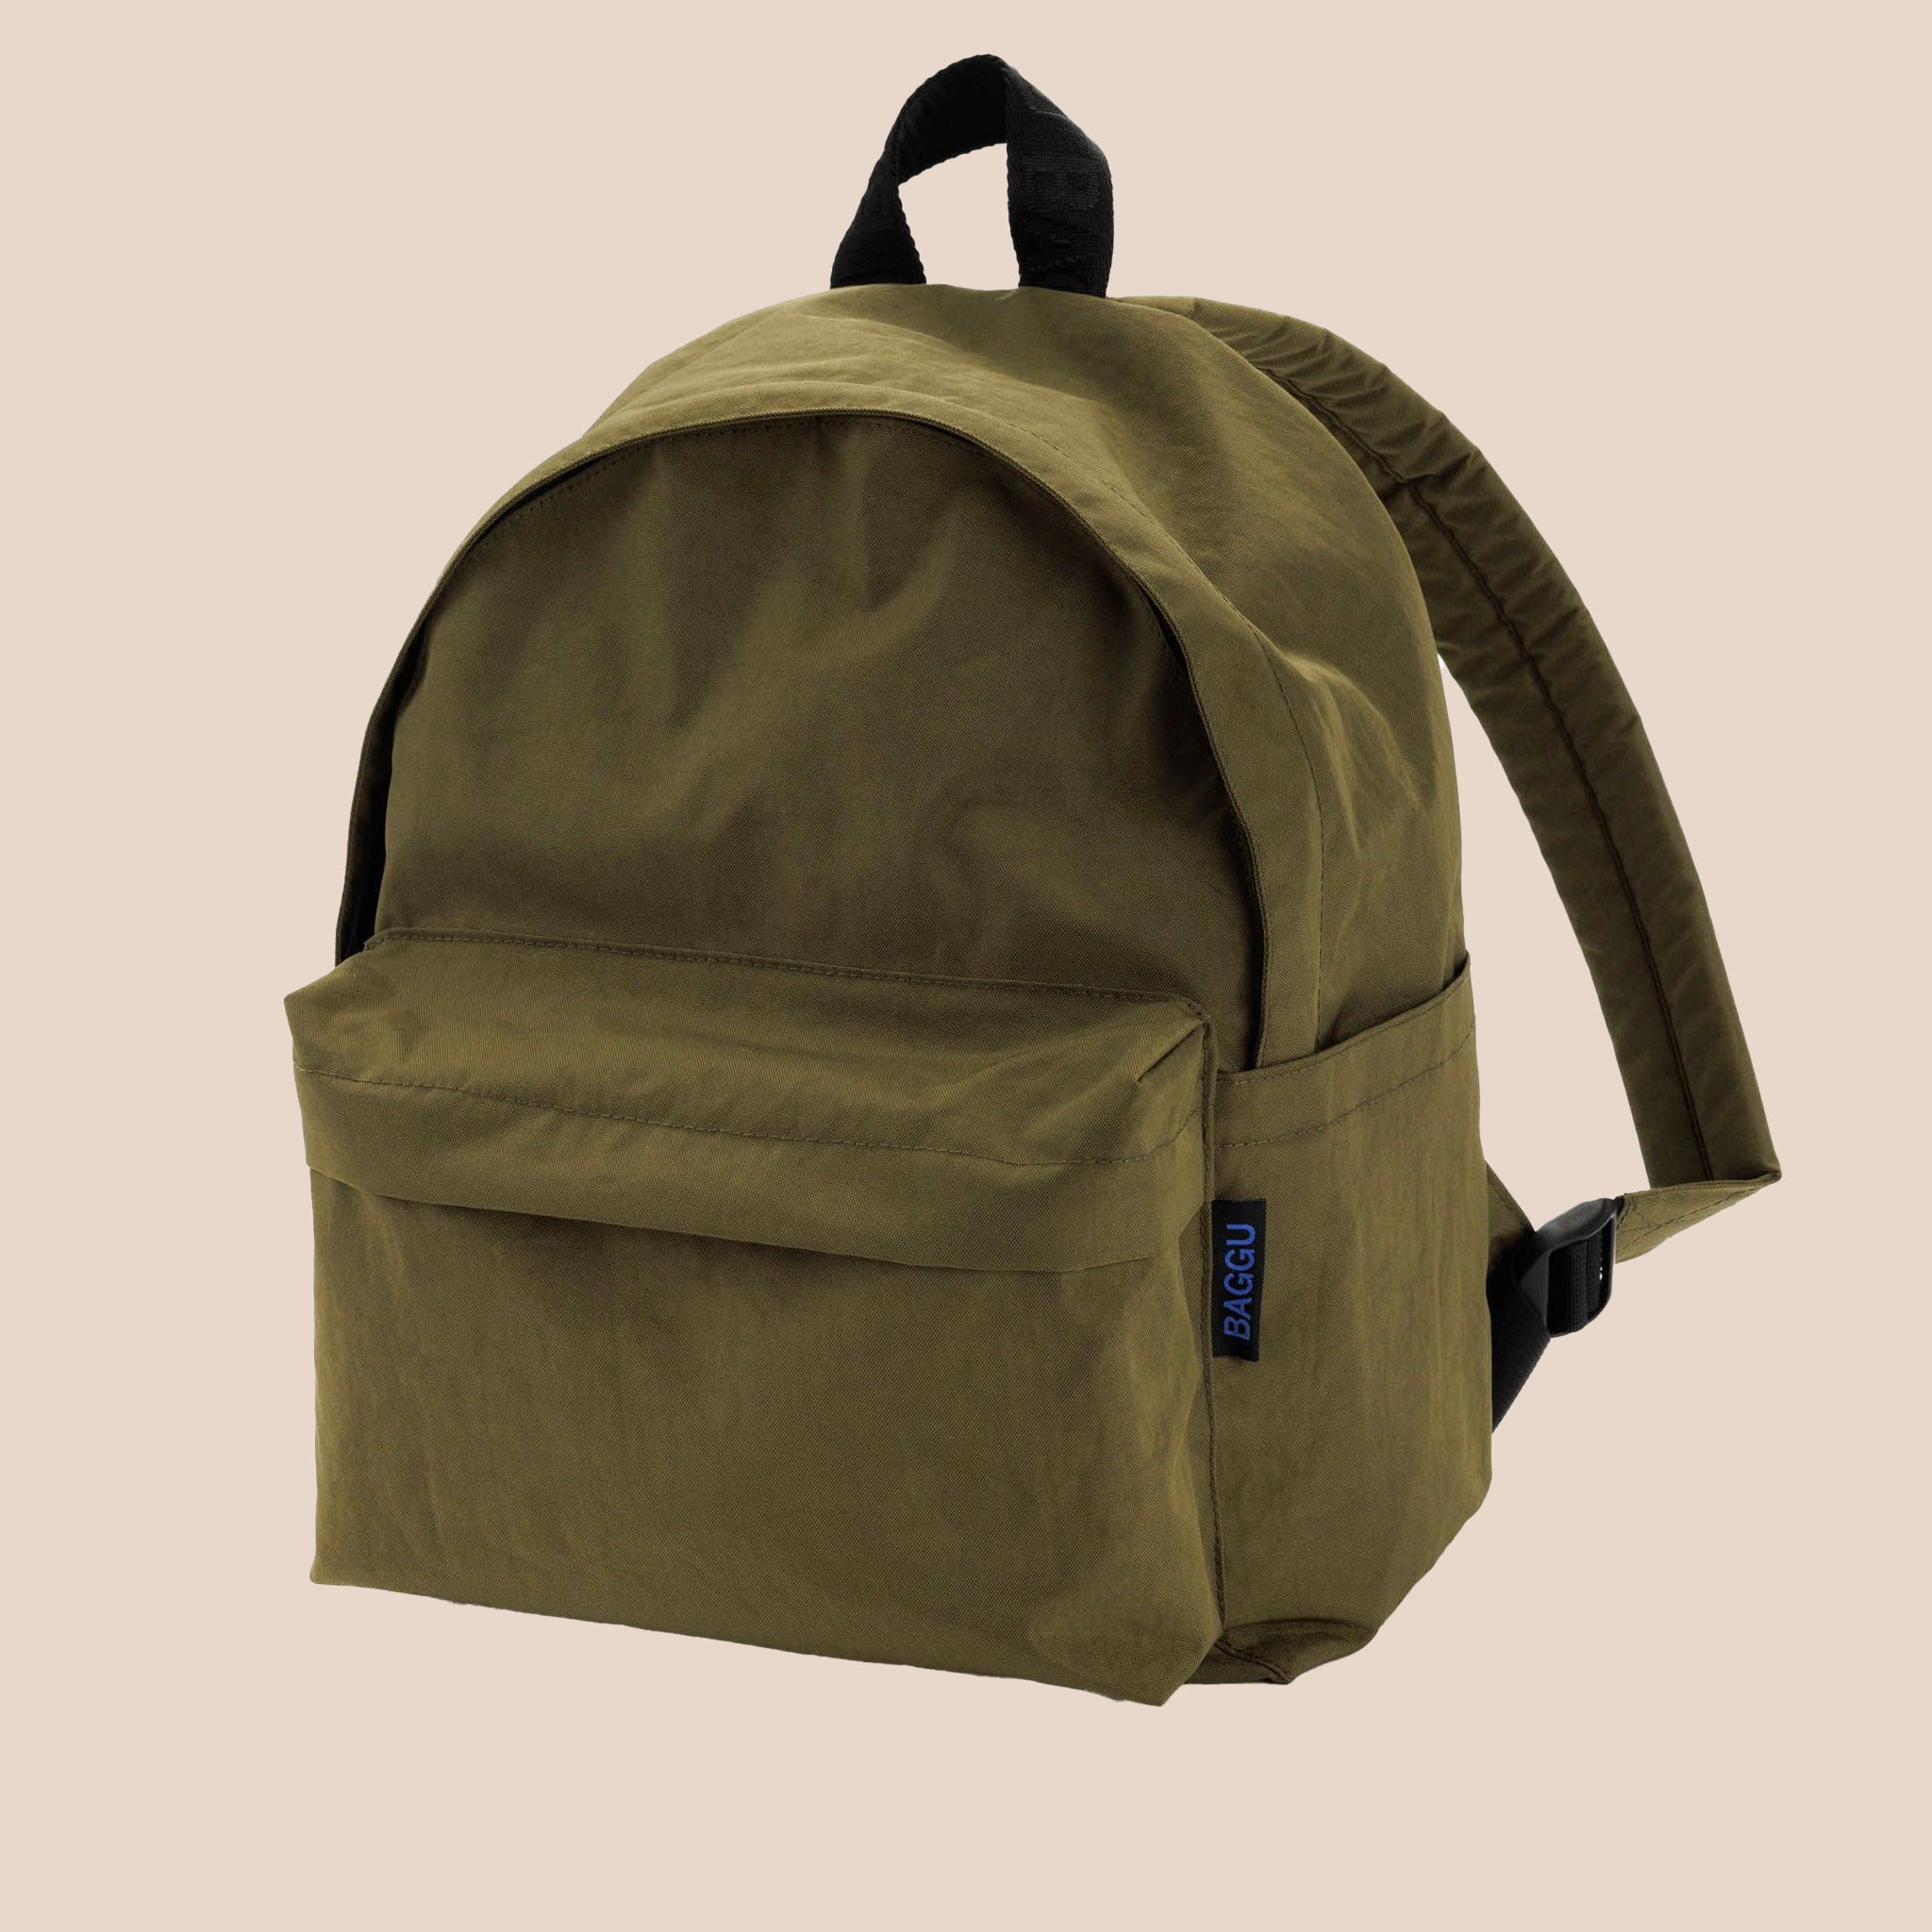 A dark green nylon backpack with side pockets,  two front zipper compartments and black straps. 